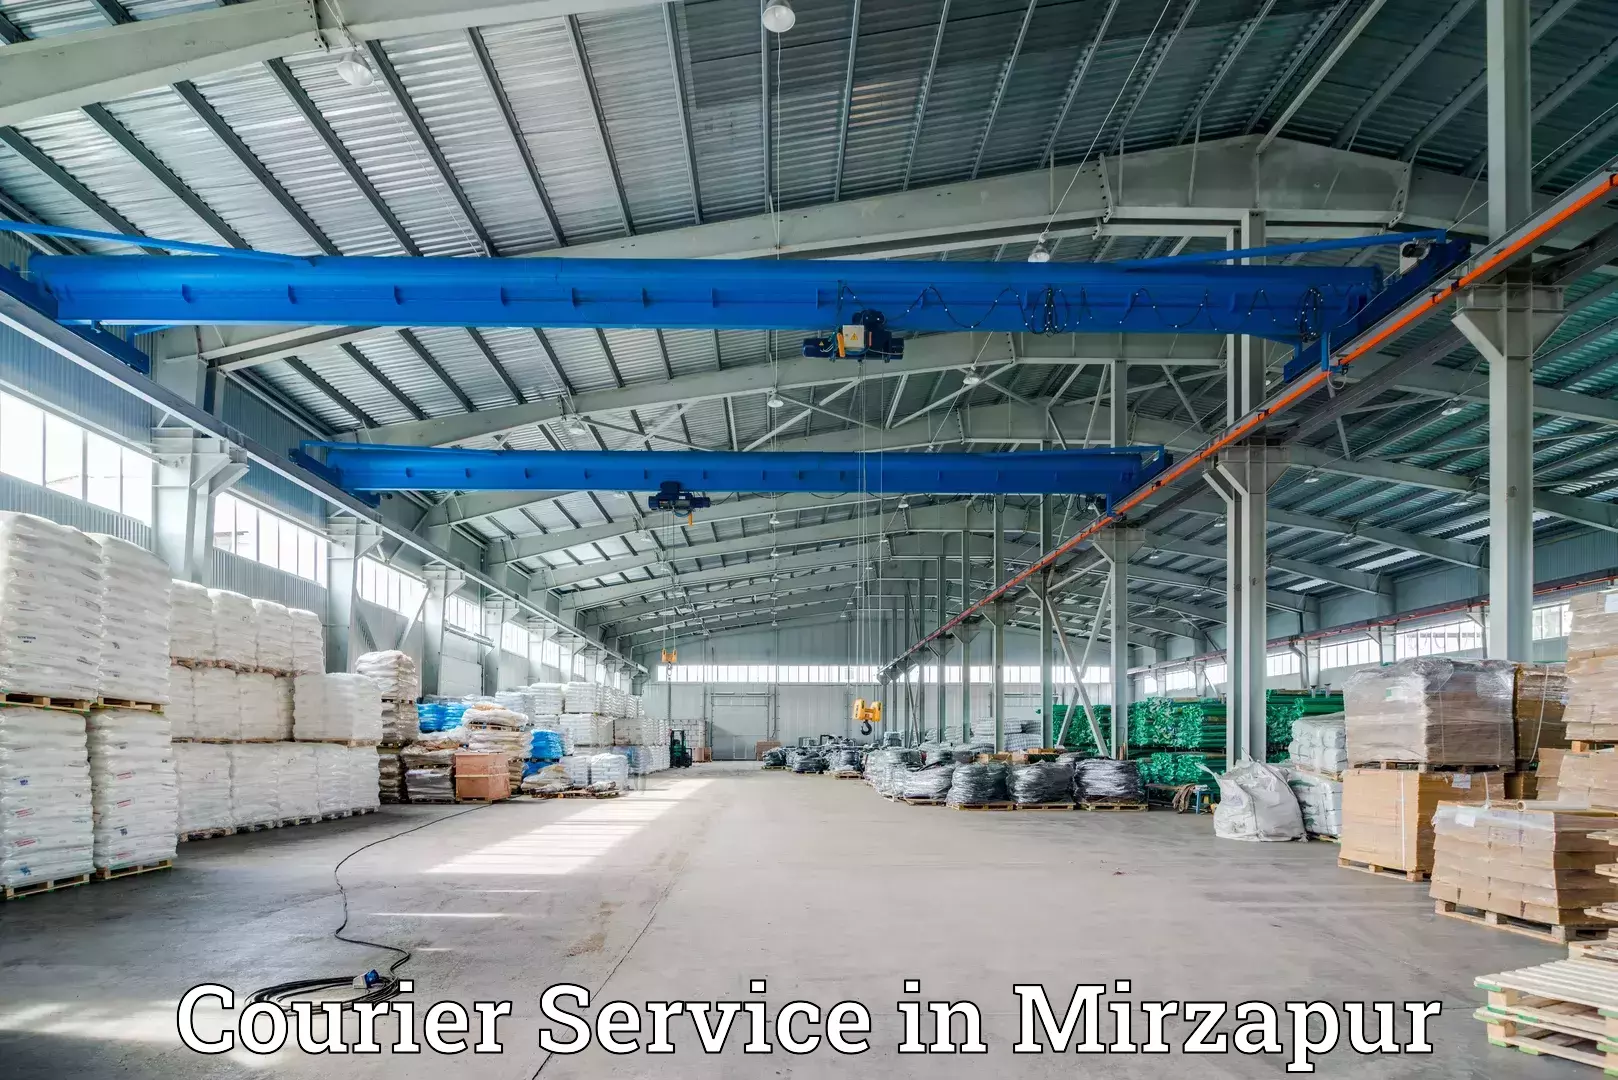 Comprehensive parcel tracking in Mirzapur